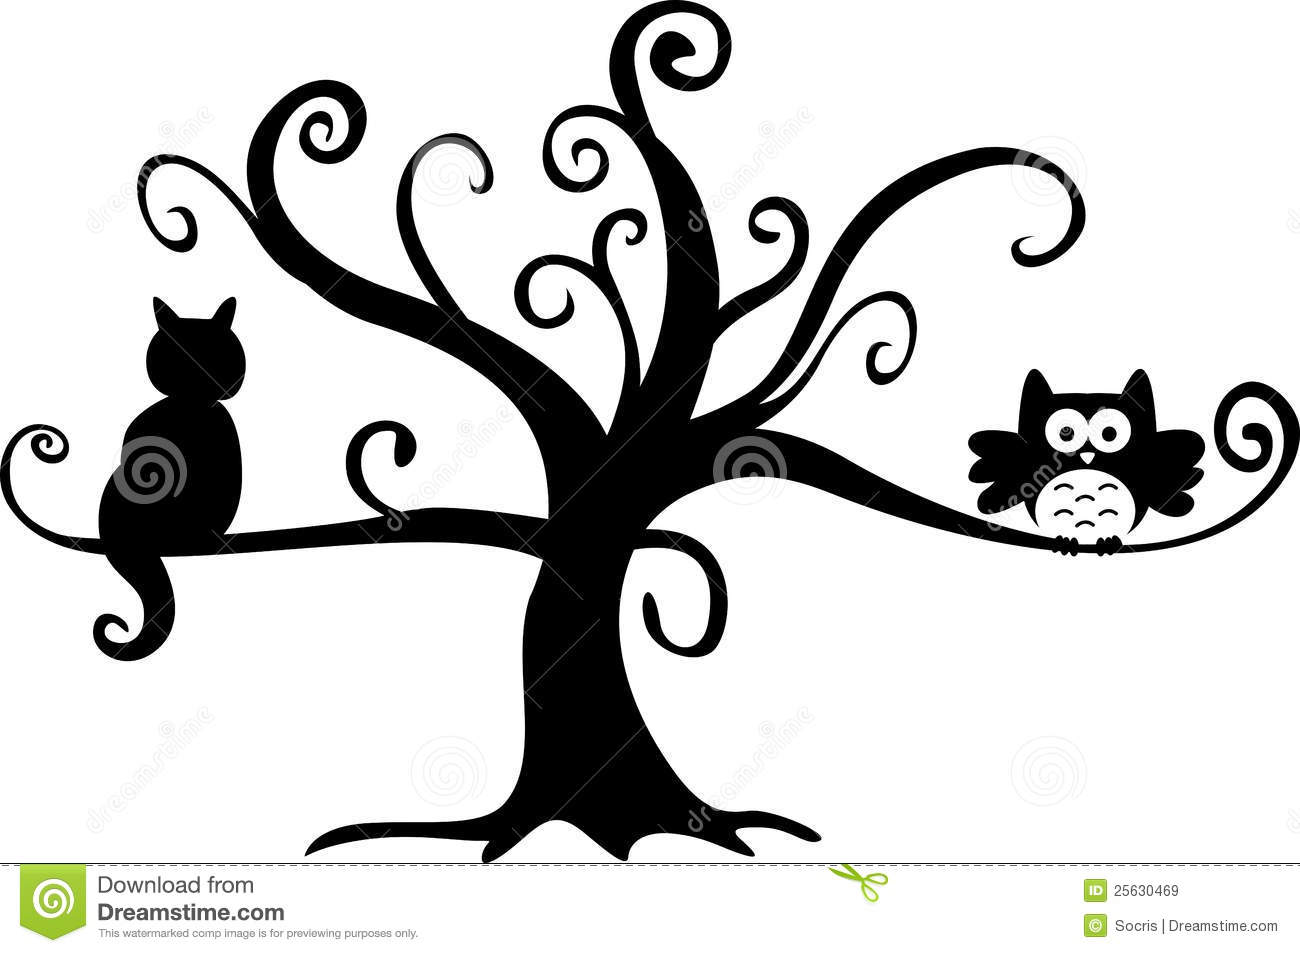 Halloween Night Owl And Cat In Tree Royalty Free Stock Images   Image